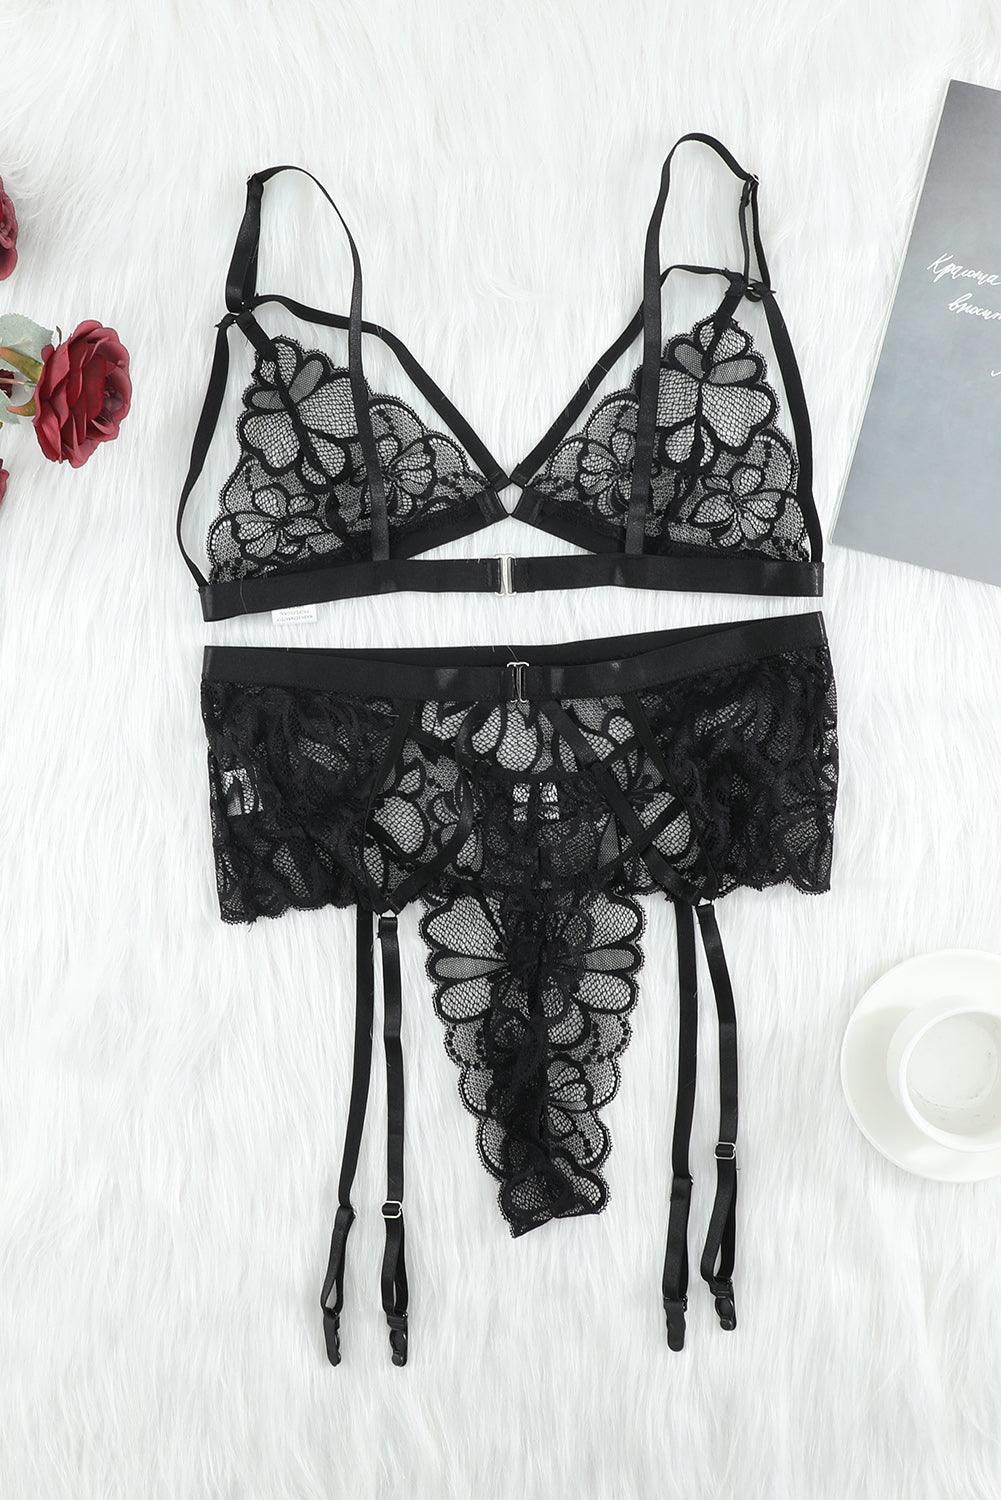 Strappy Three-Piece Lace Lingerie Set - Flyclothing LLC